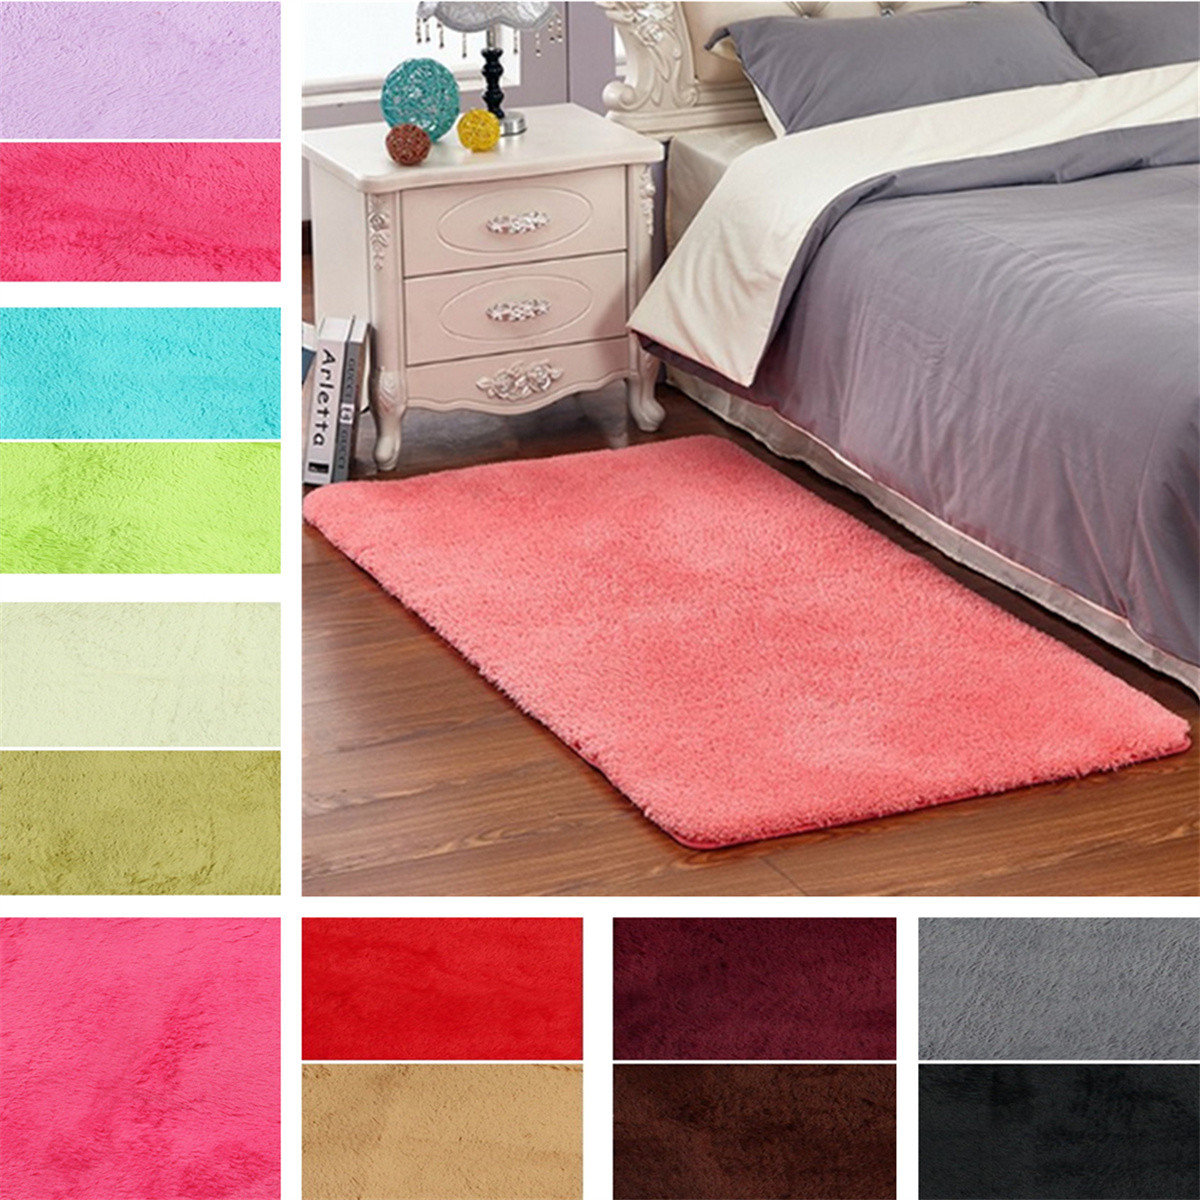 

60x120cm Shaggy Fluffy Rugs Anti-Skid Area Rug Dining Room Carpet Home Bedroom Floor Mat, Green fruit blue pink gray coffee red / rose rice white khaki purple green red wine red black